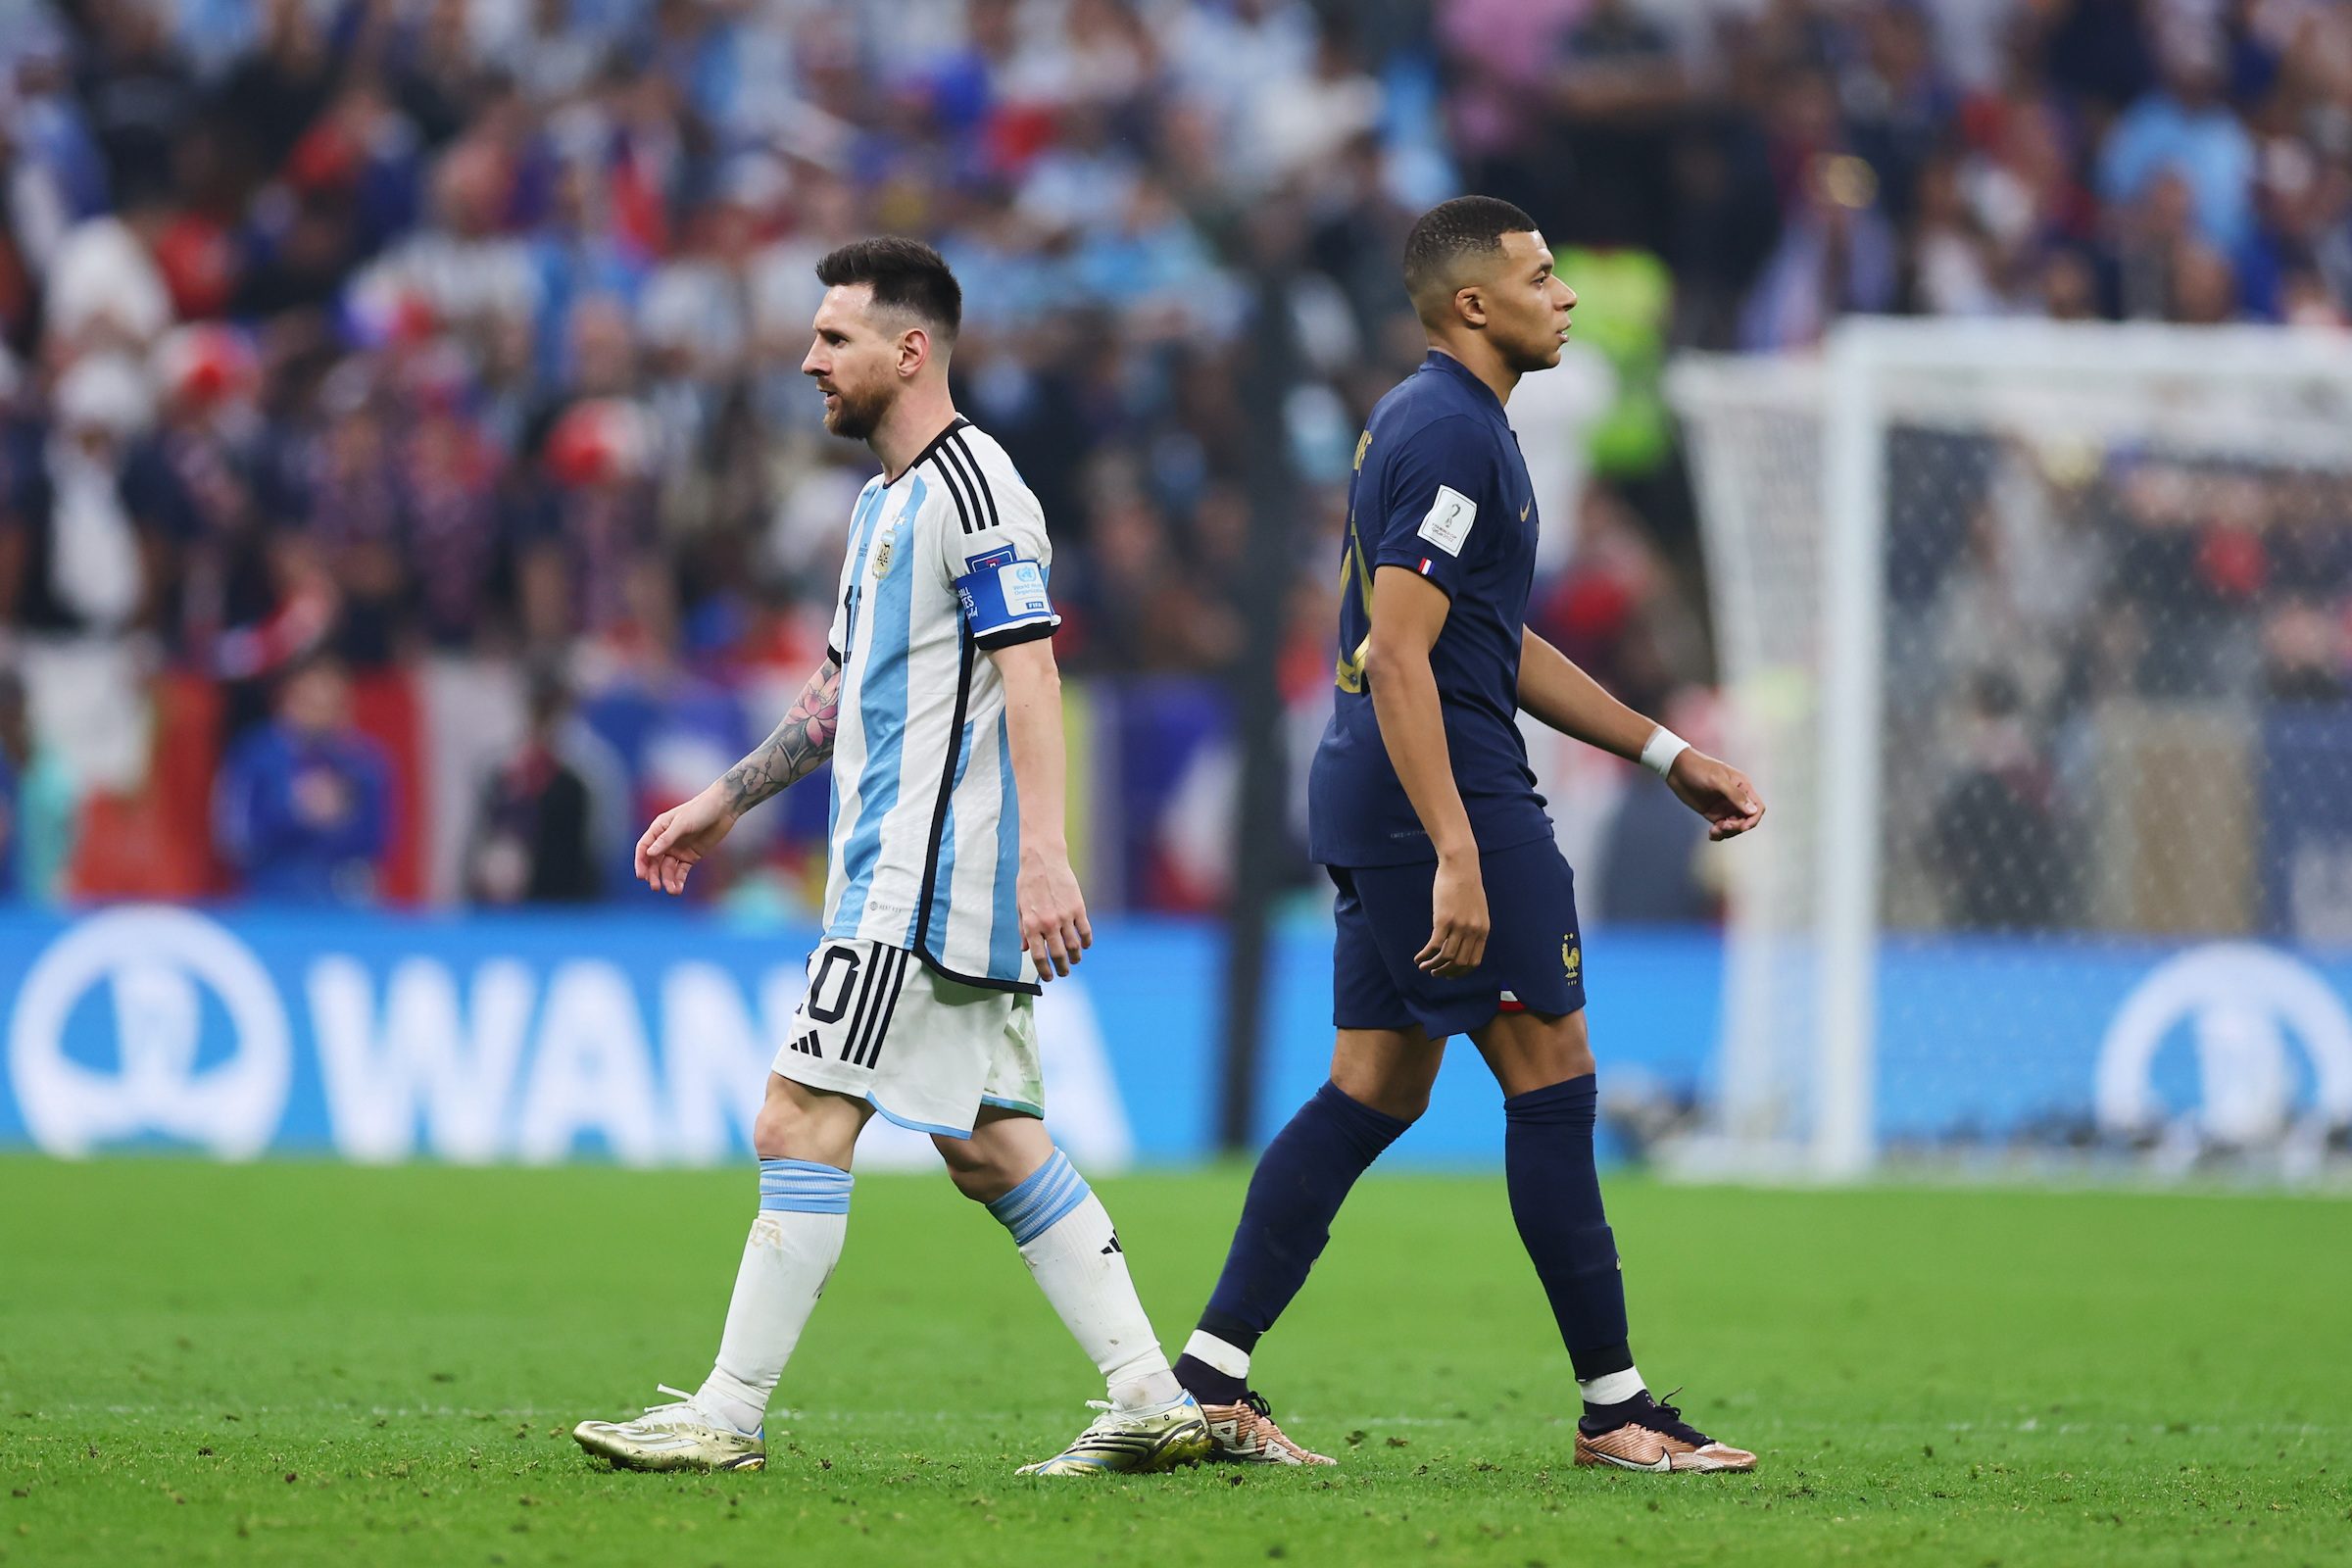 Lionel Messi and Kylian Mbappé went head to head in the World Cup final as PSG players